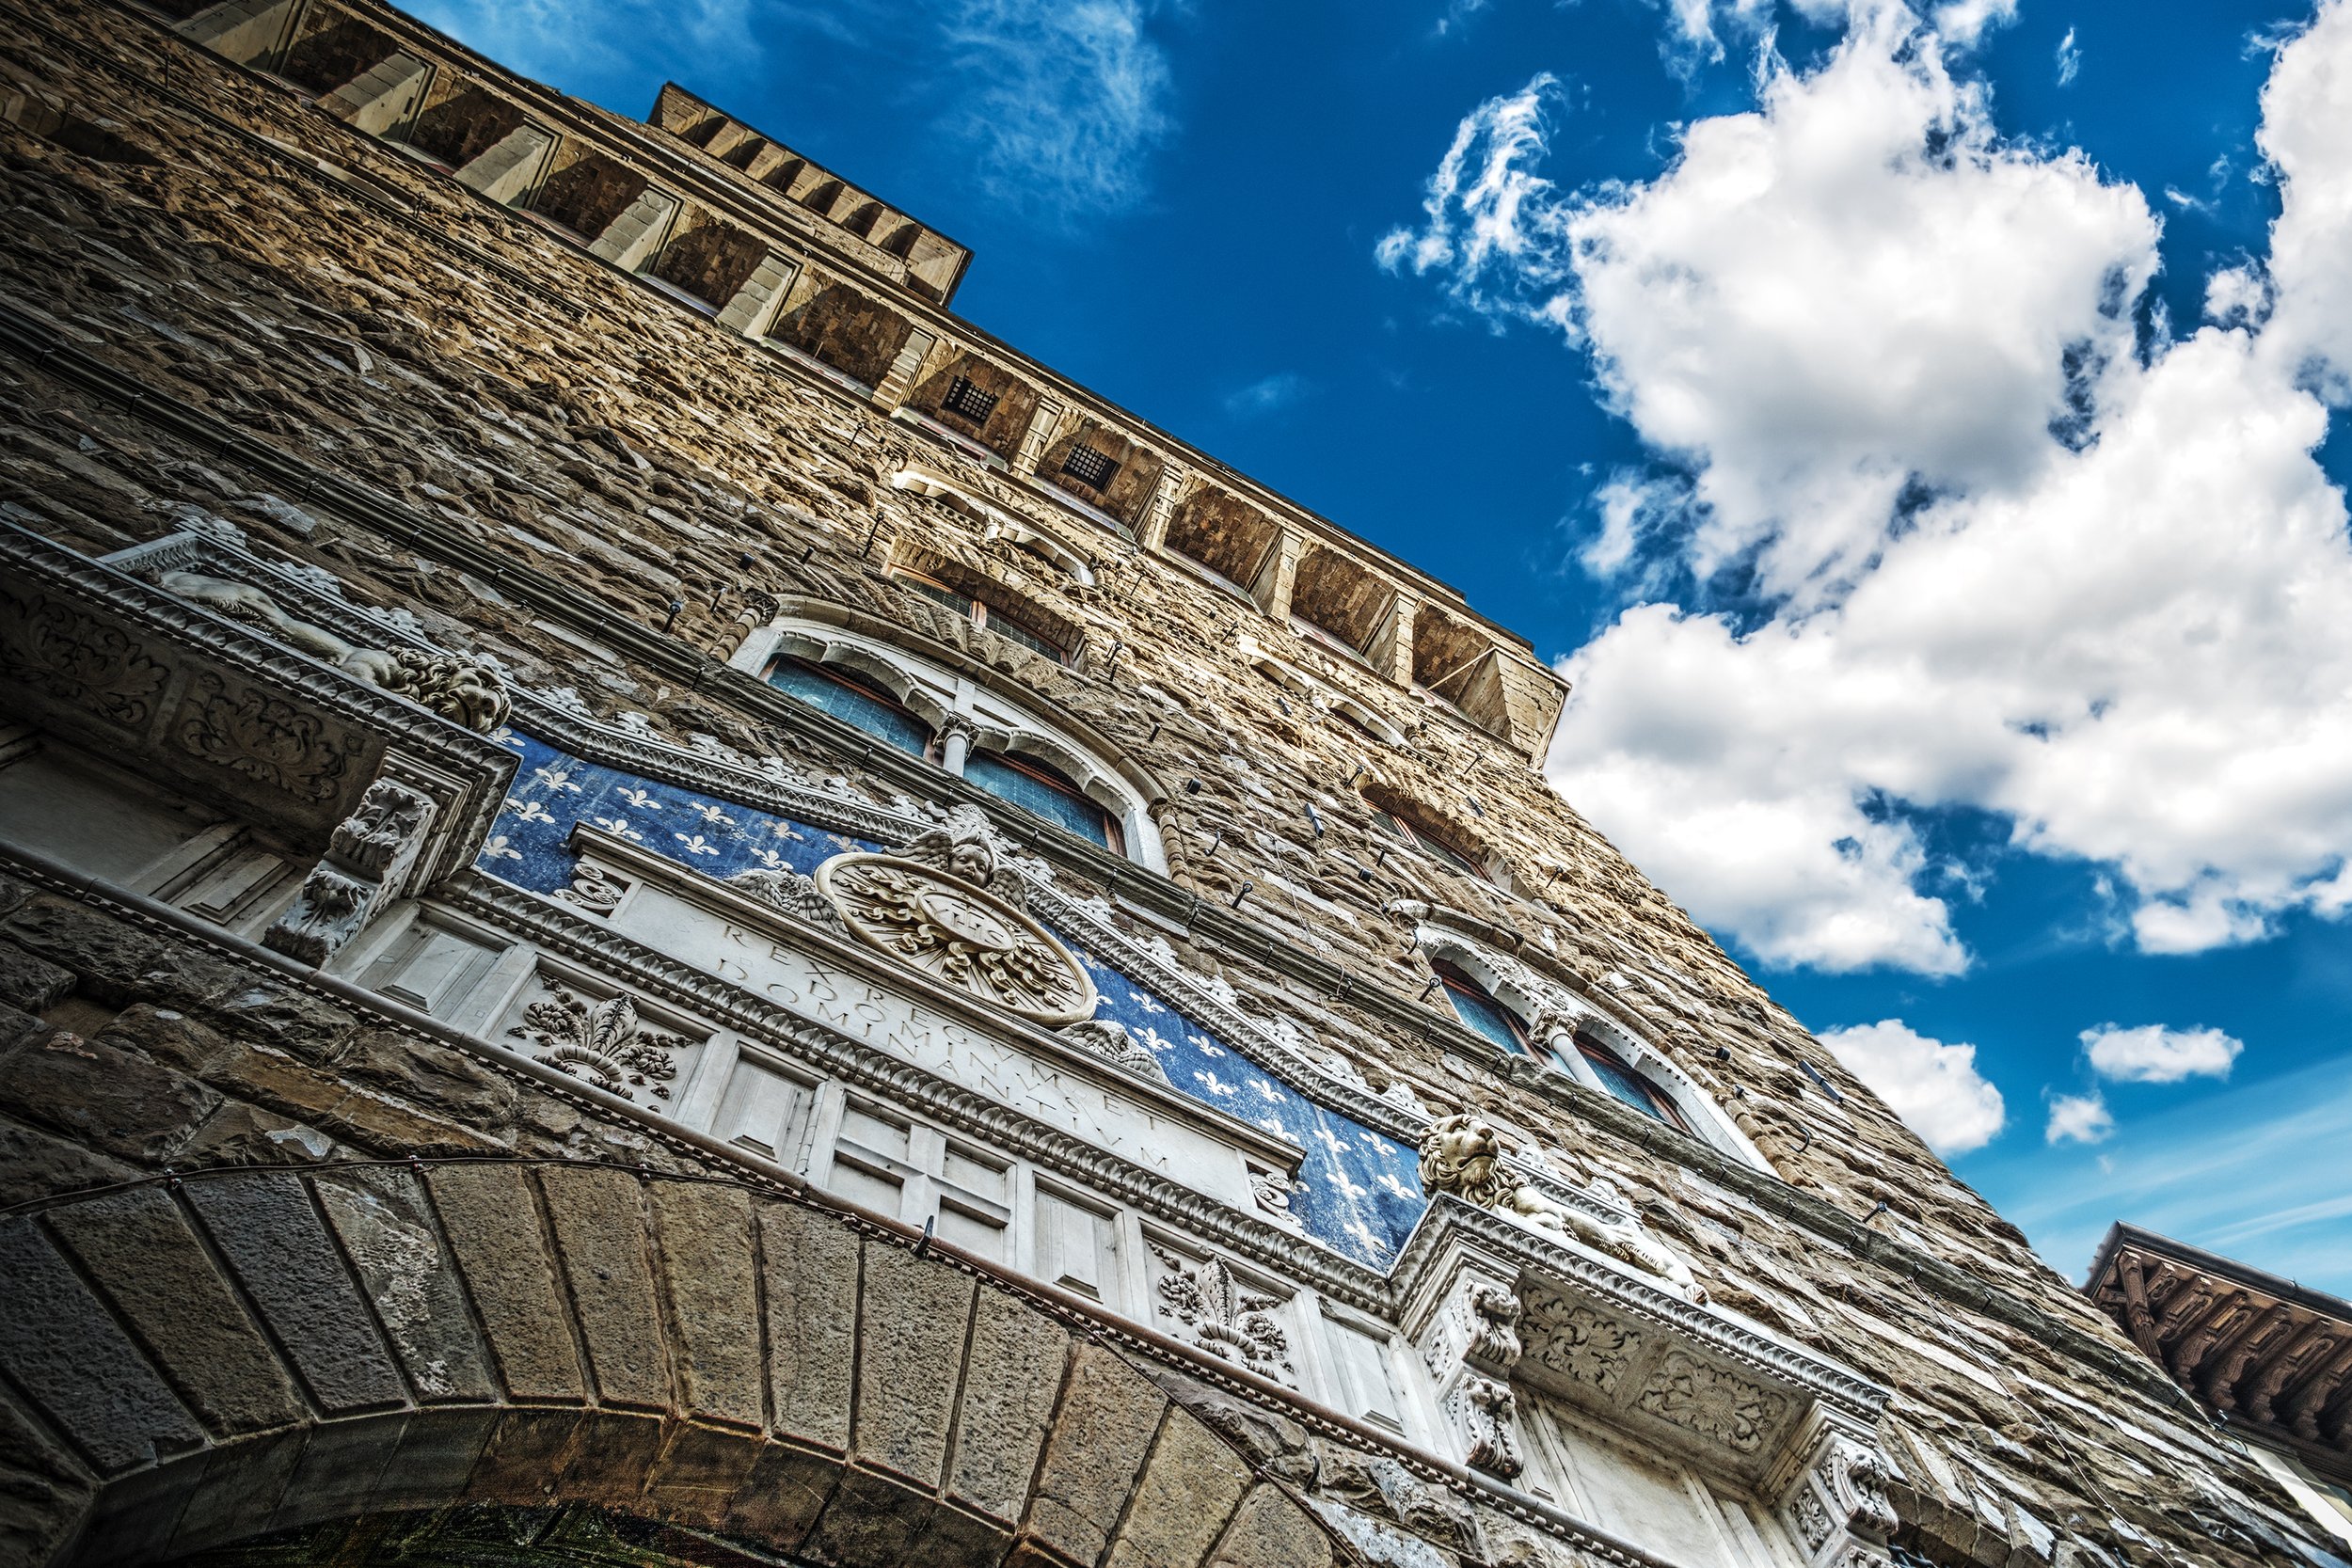 palazzo-vecchio-seen-from-cloudy-day.jpg